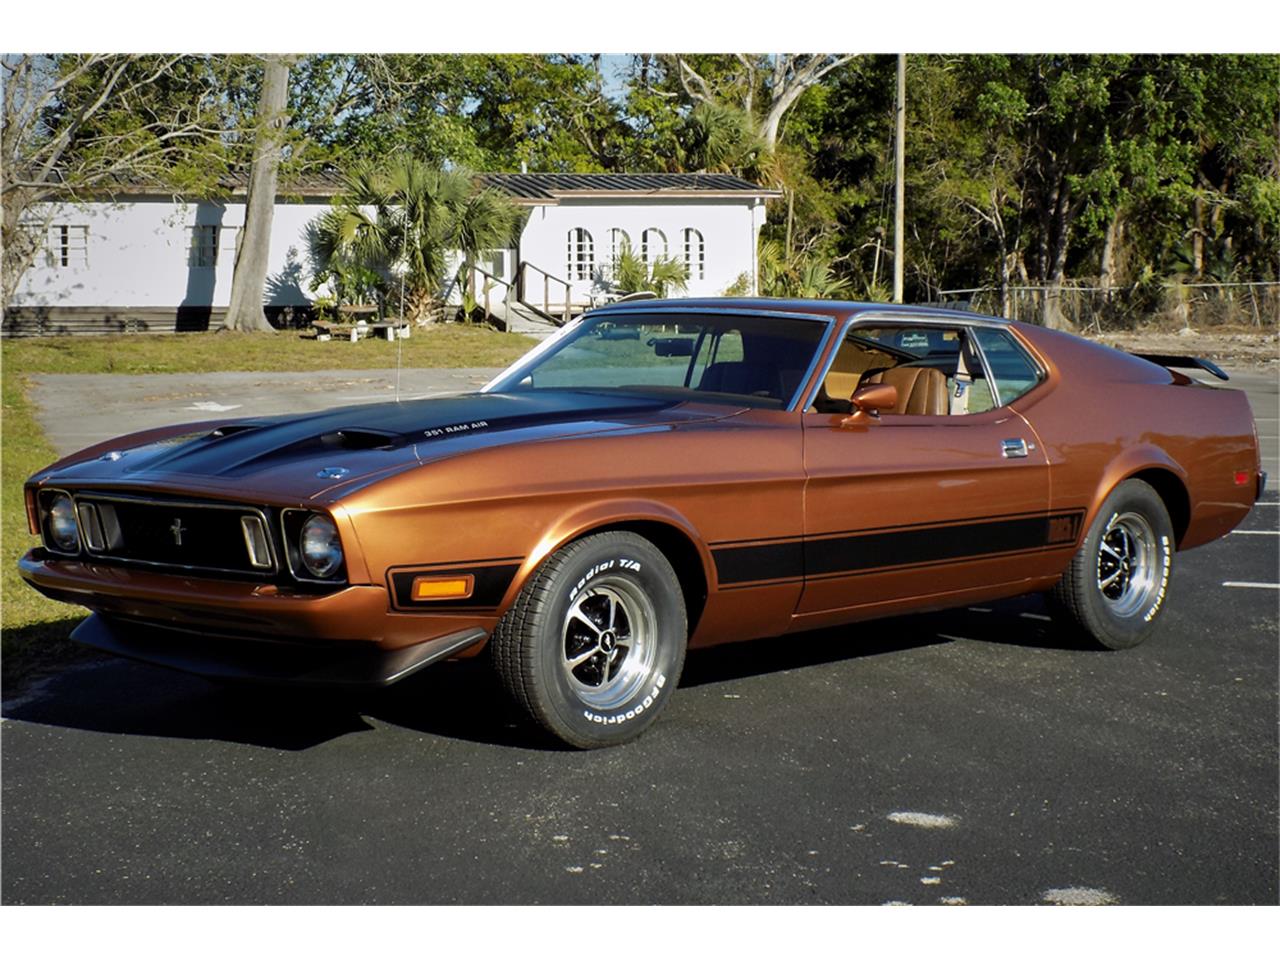 1973 Ford Mustang Mach 1 for Sale | ClassicCars.com | CC-1077419